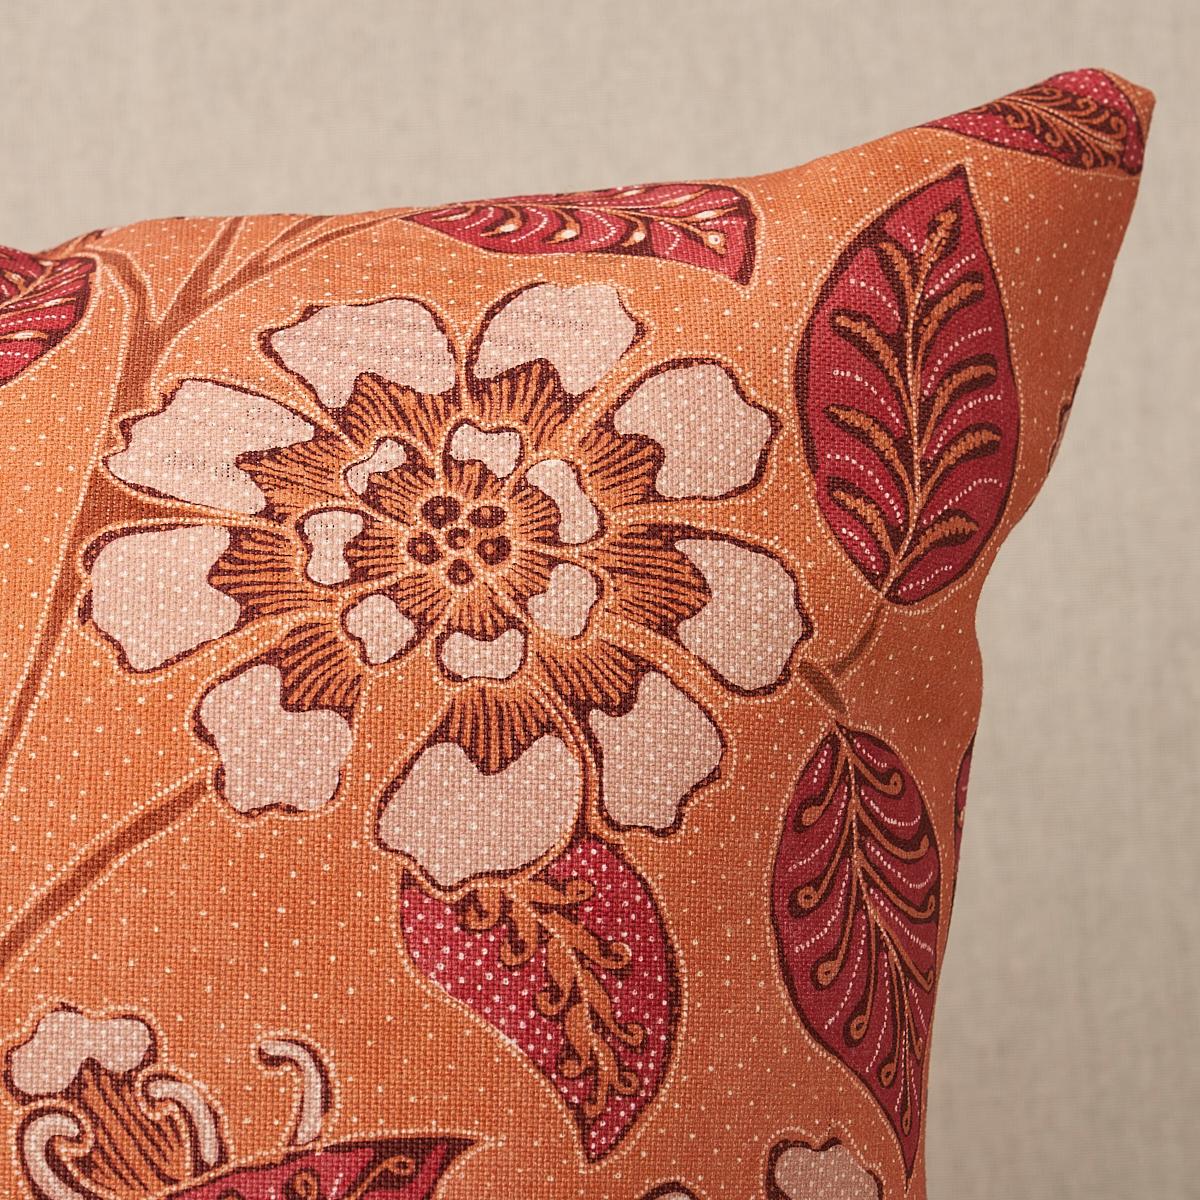 This pillow features Kava Cay Indoor/Outdoor with a knife edge finish. A loose, leafy floral inspired by a vintage batik, Kava Cay Indoor/Outdoor in mango is a beautifully detailed mid-scale pattern with the look of a traditional resist-dyed